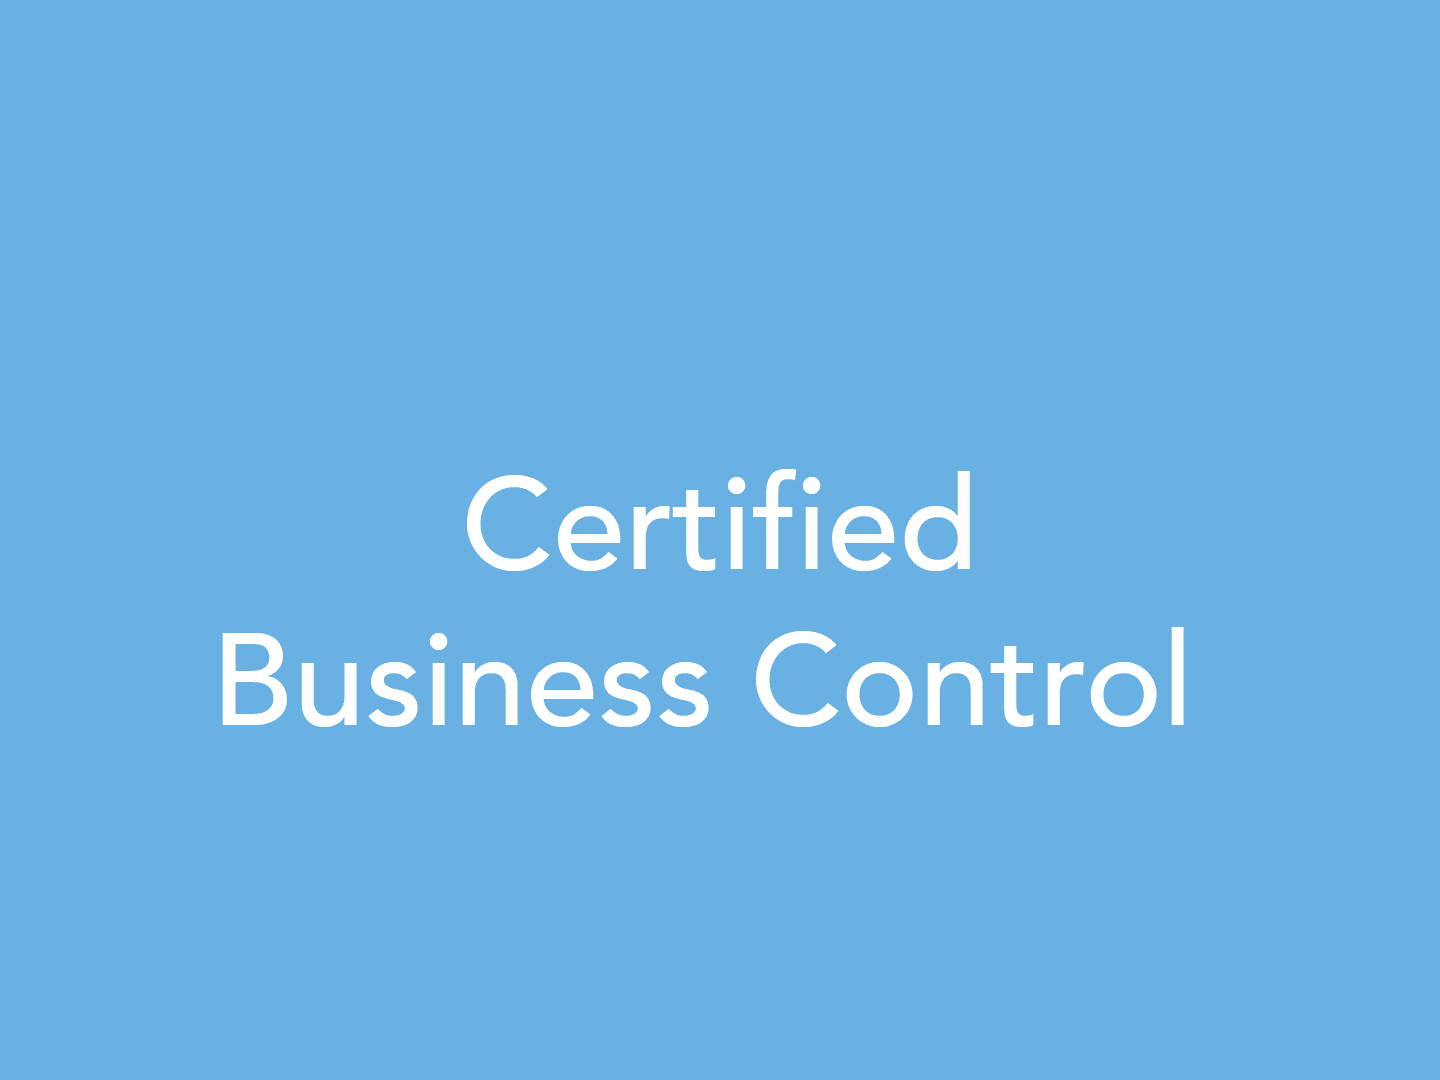 Certified Business Control